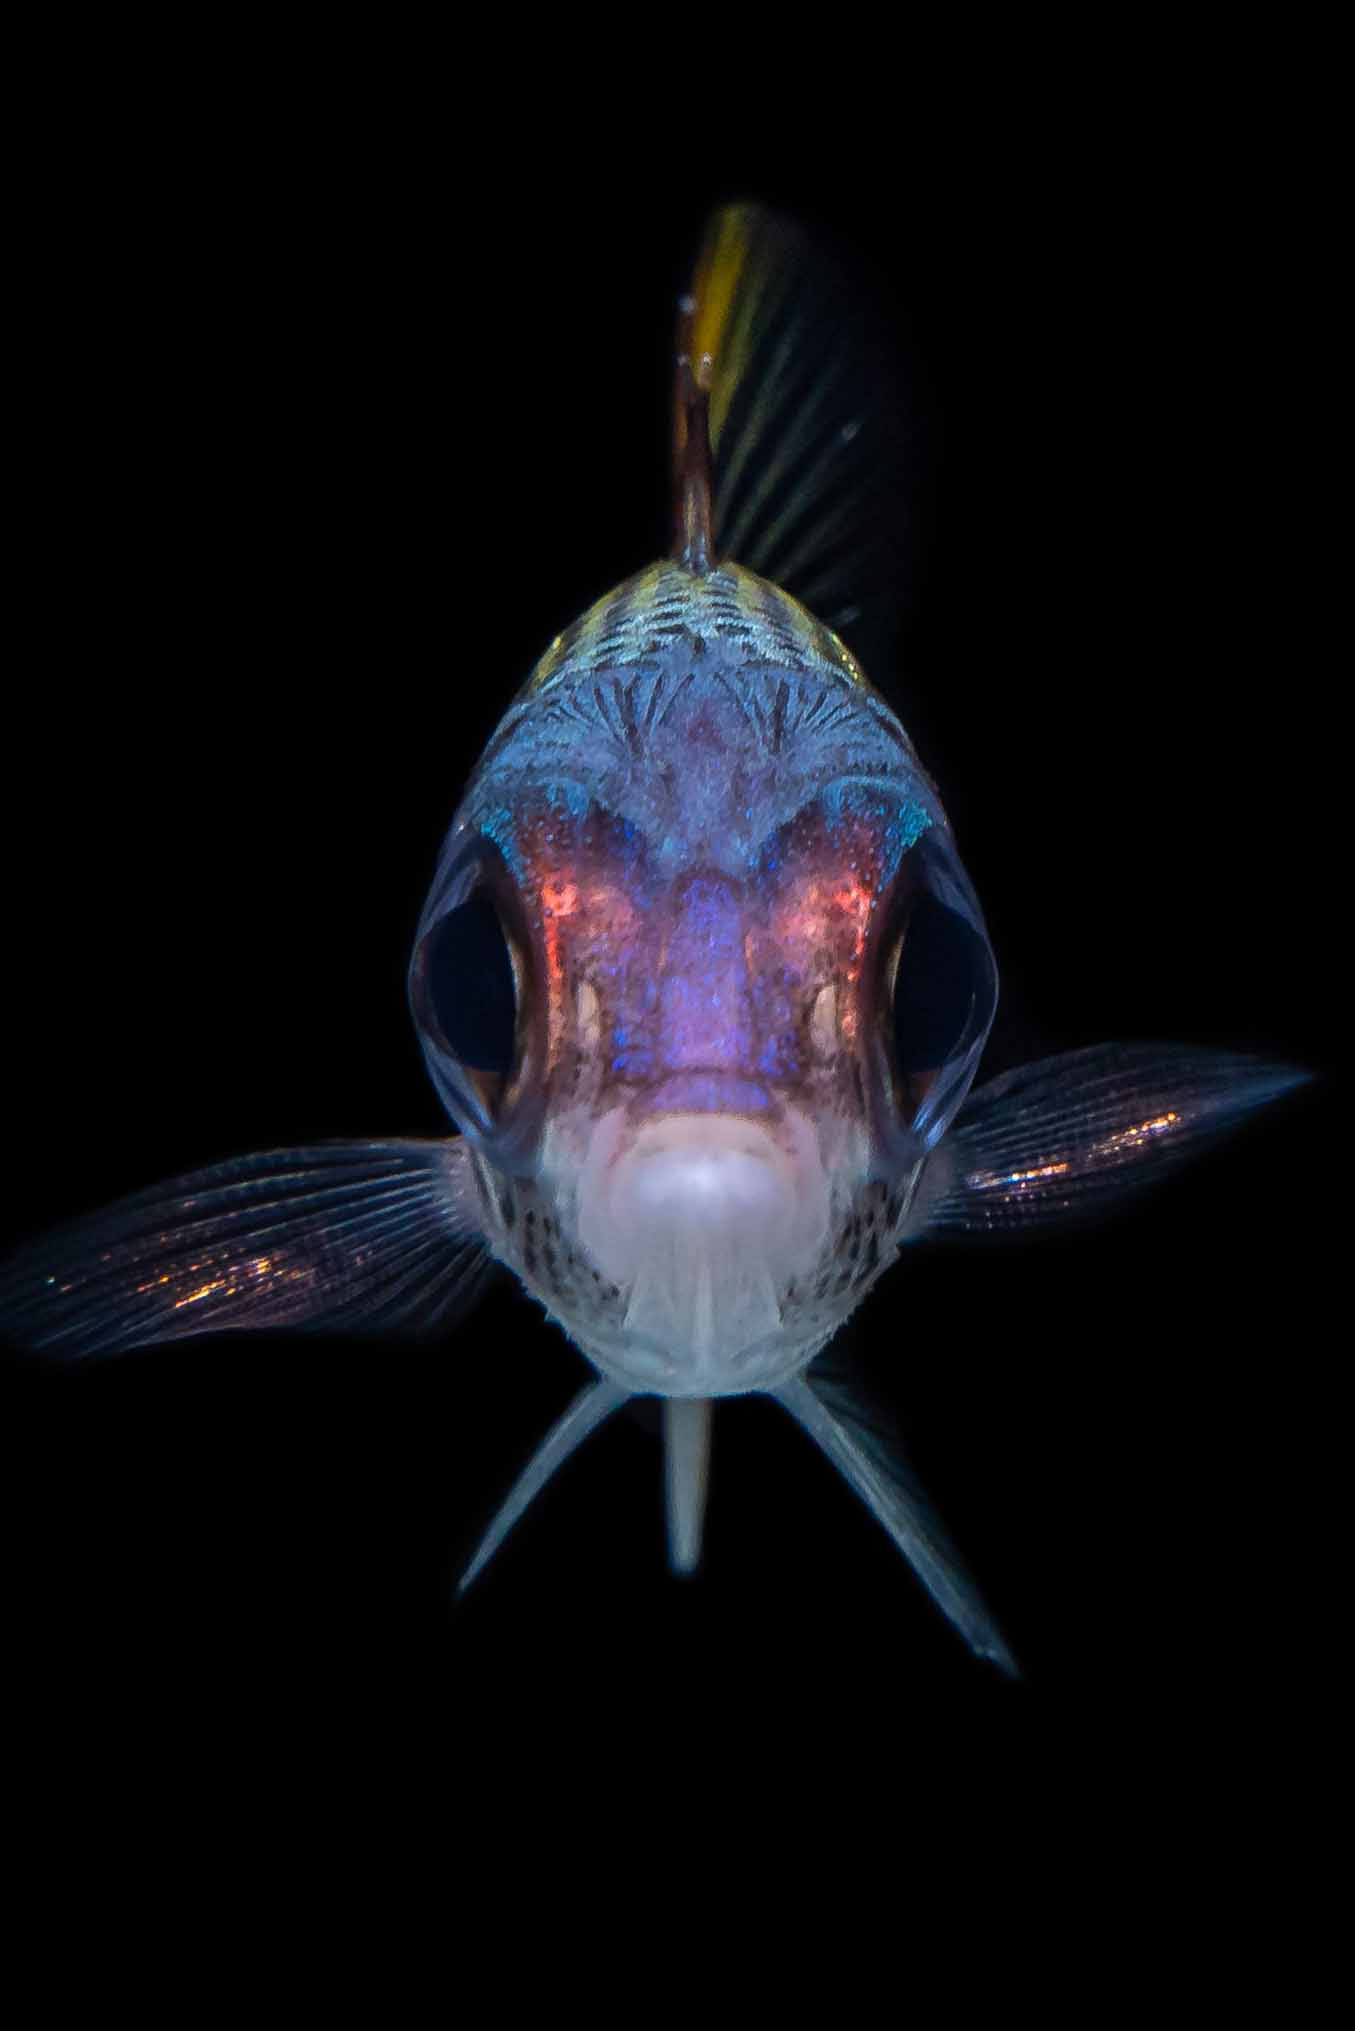 The retina of these fish contain between six and 17 banks of highly sensitive rod photoreceptor cells, possibly allowing them to see colour in the dark. Image: Valerio Tettamanti